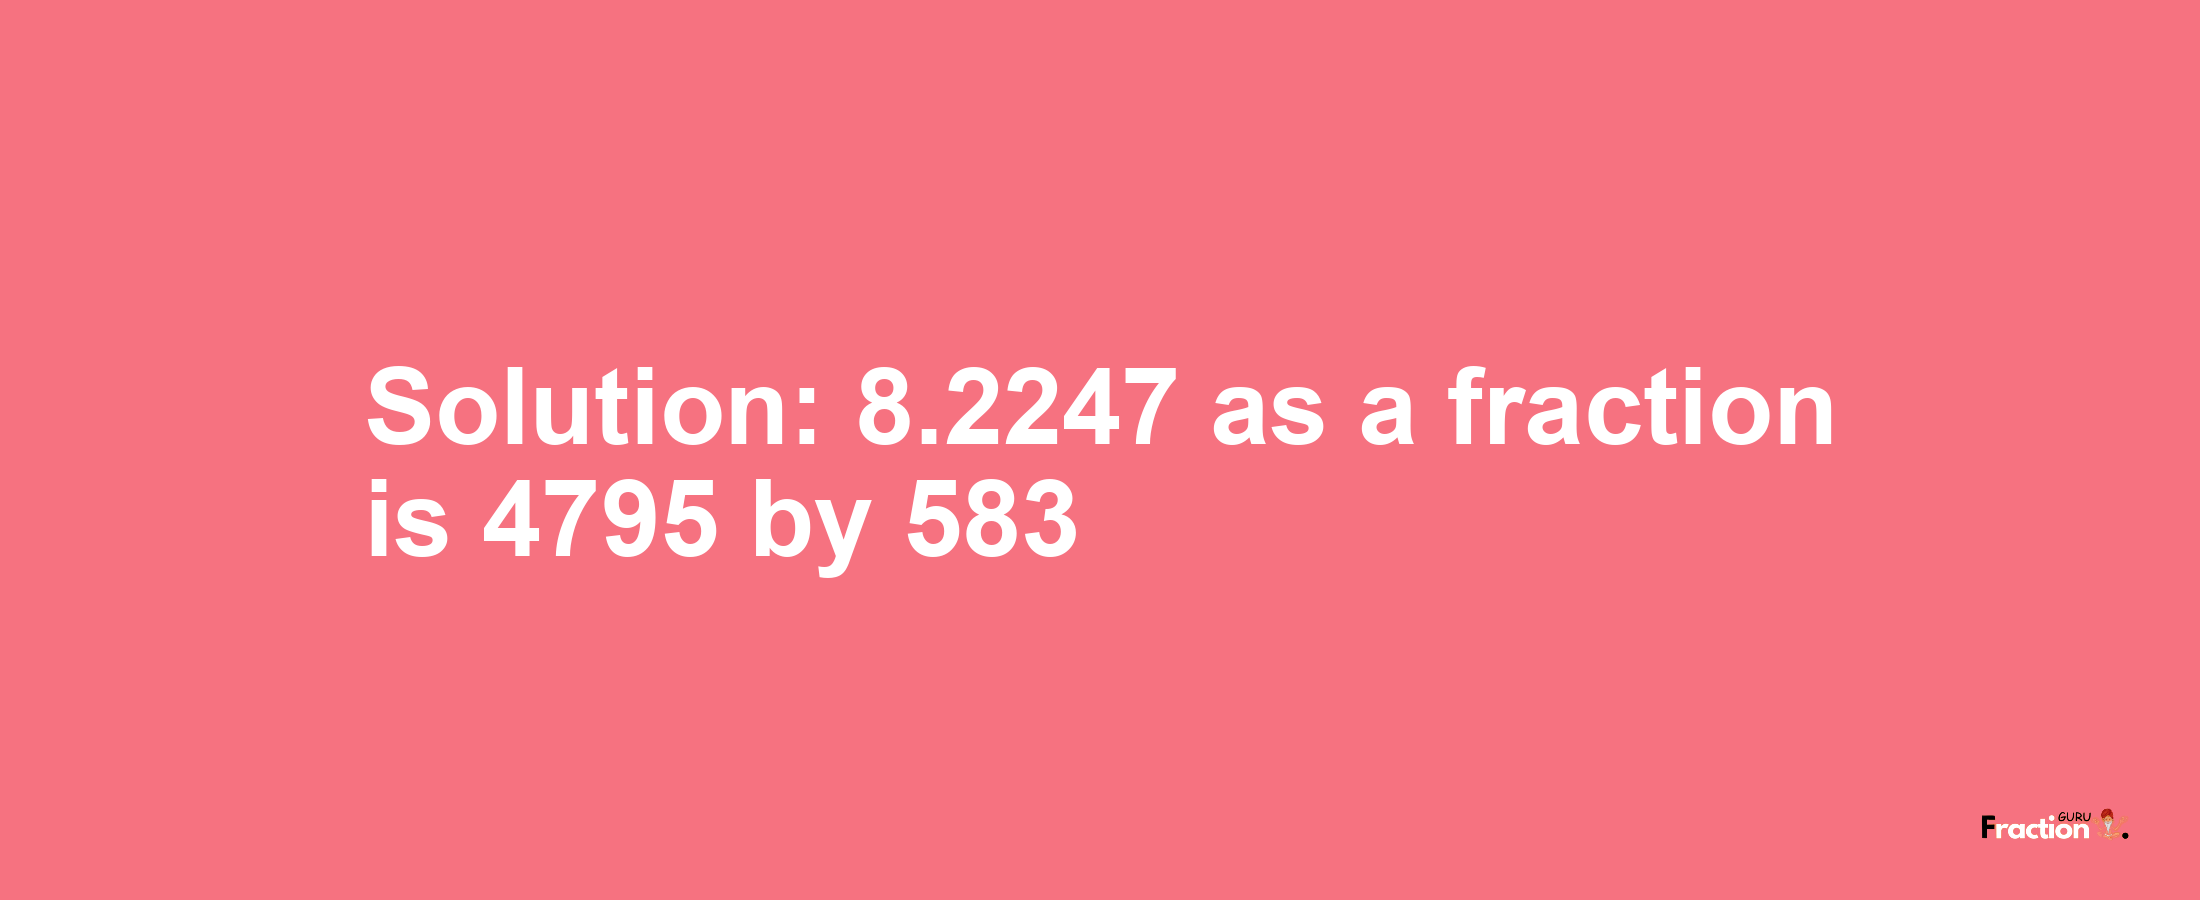 Solution:8.2247 as a fraction is 4795/583